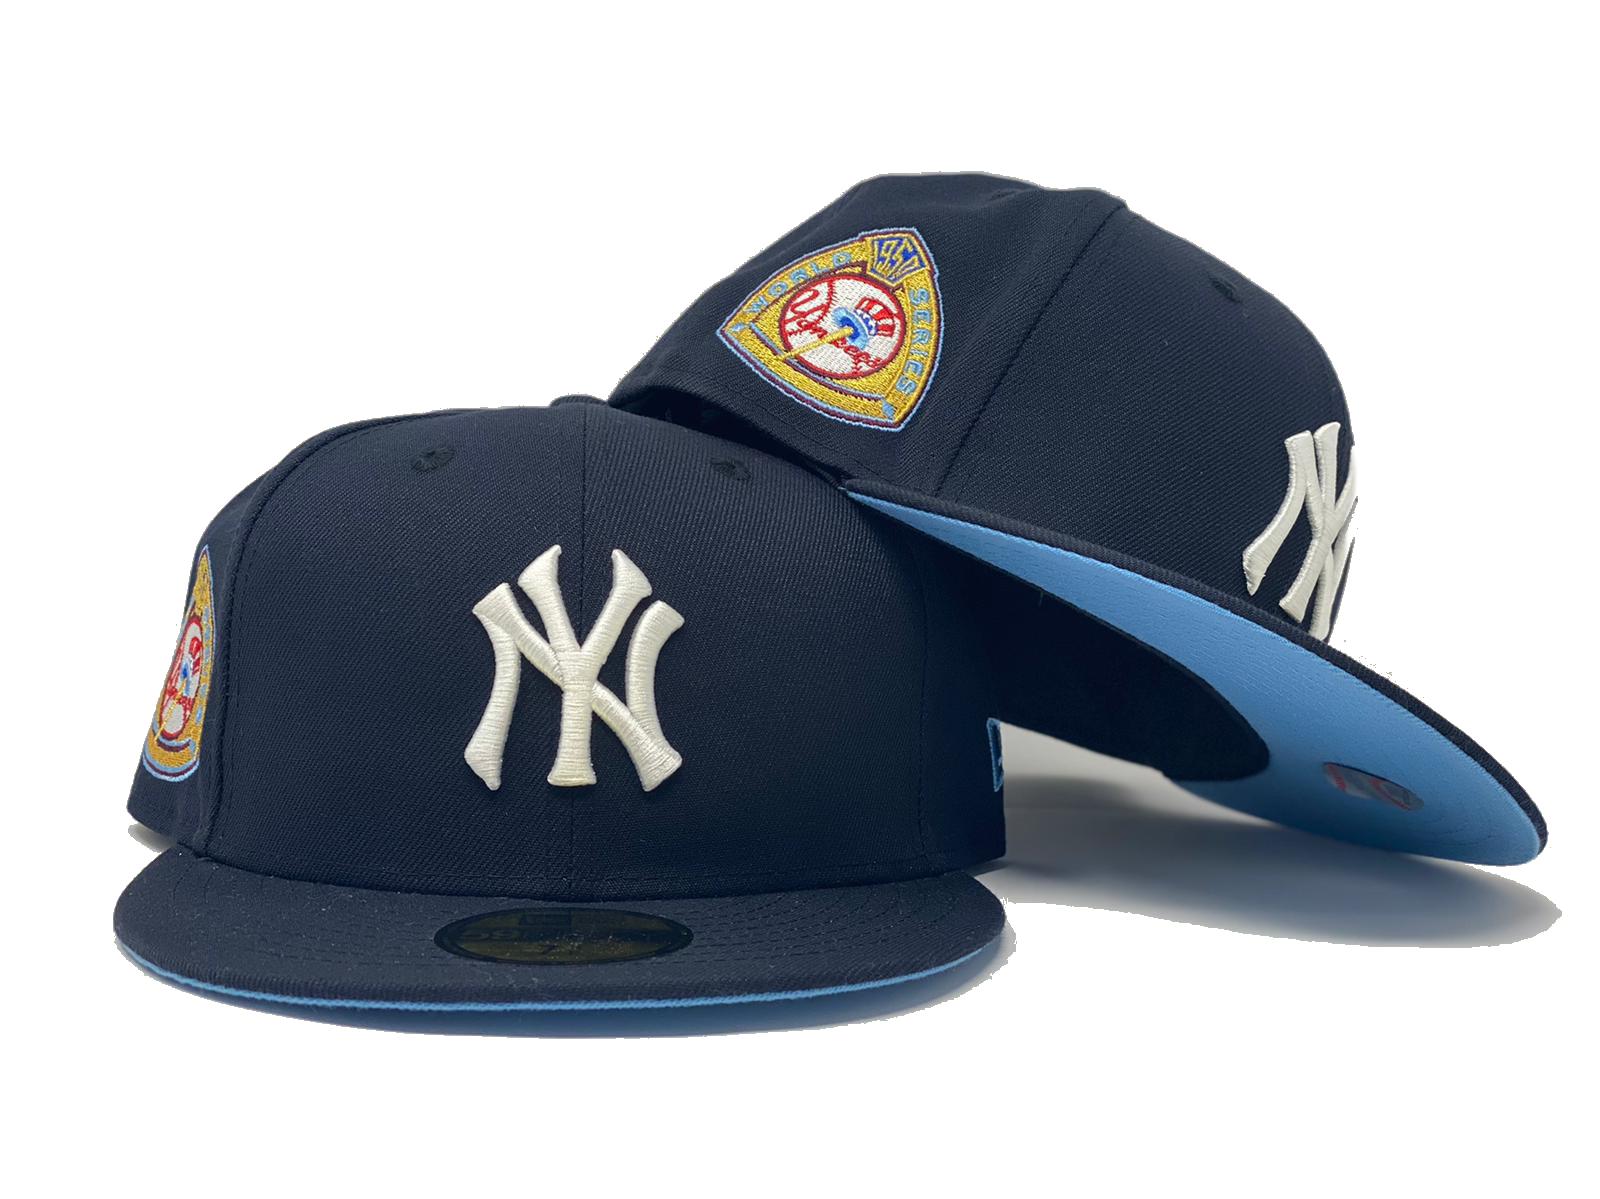 New York Yankees World Series Championships (Blue) Fitted